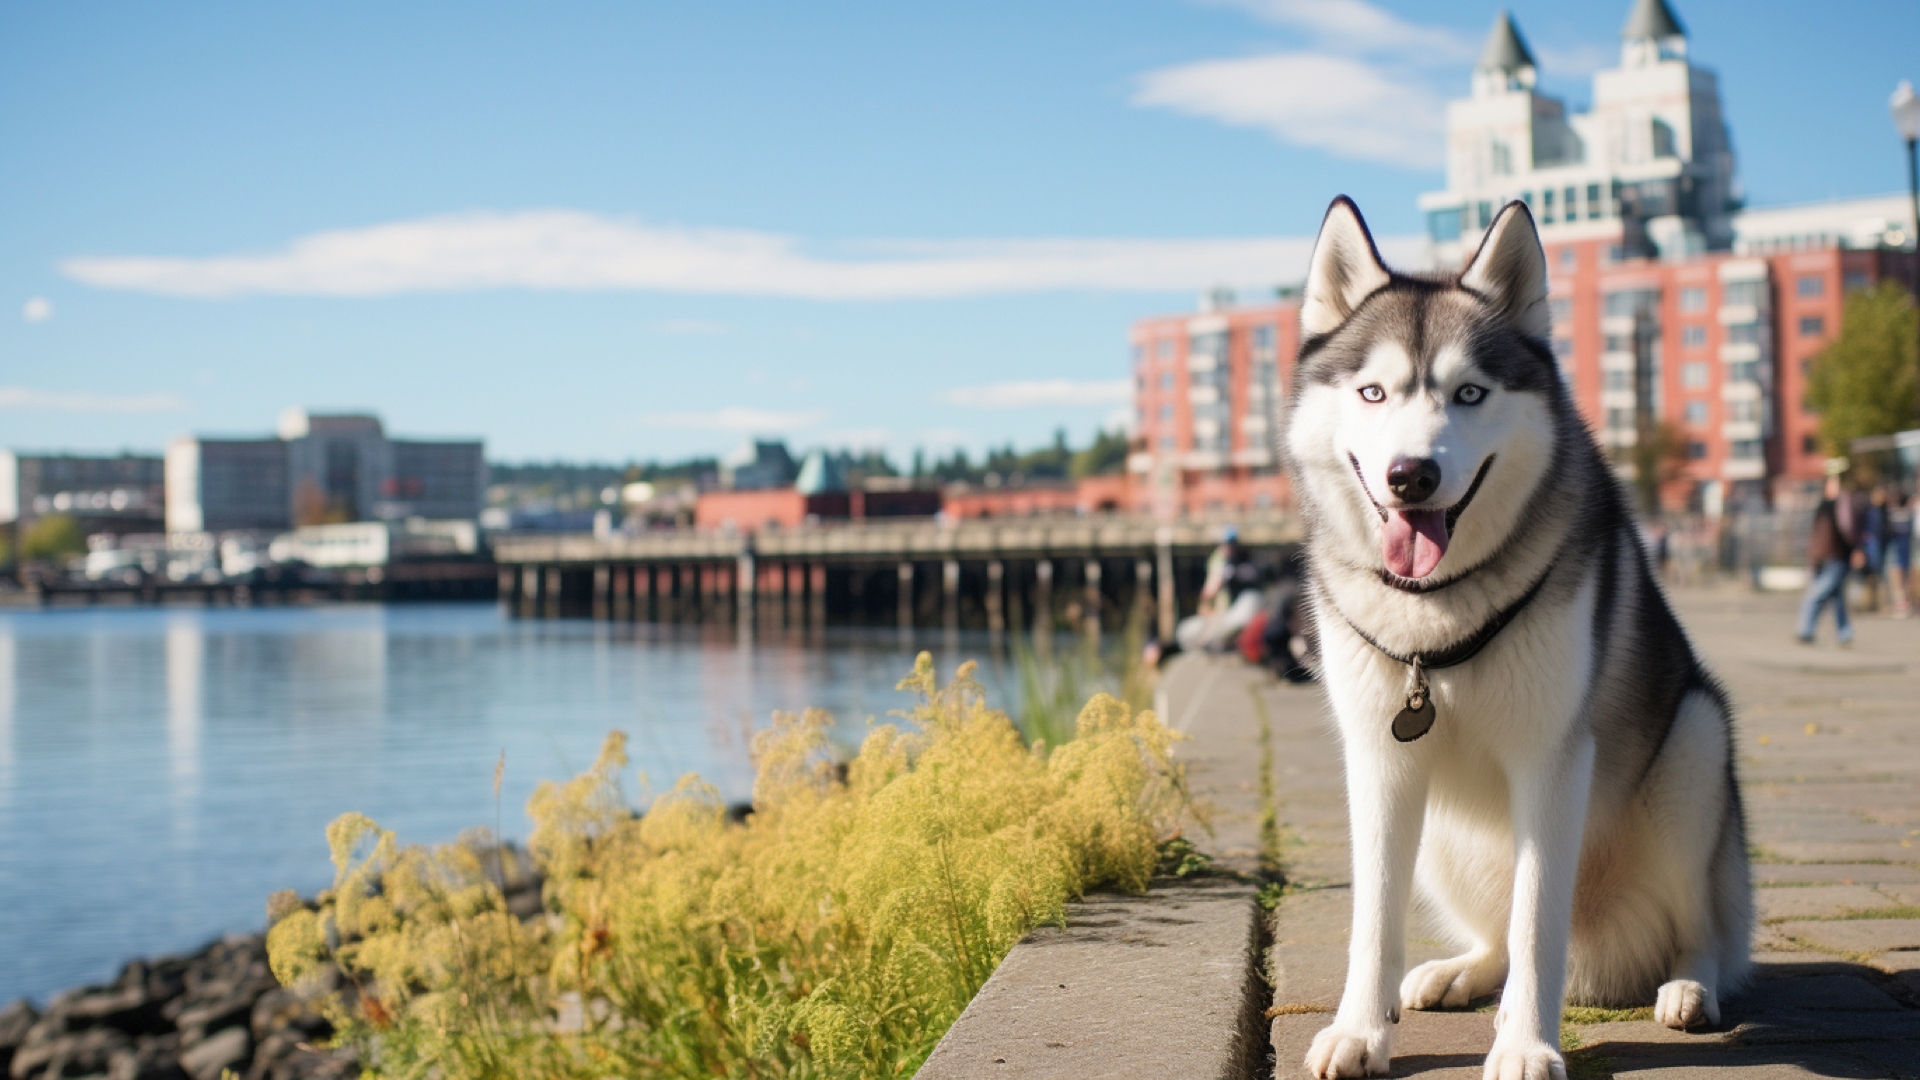 Siberian Huskies in Stumptown, Thriving in the Chill and Thrill of Portland!